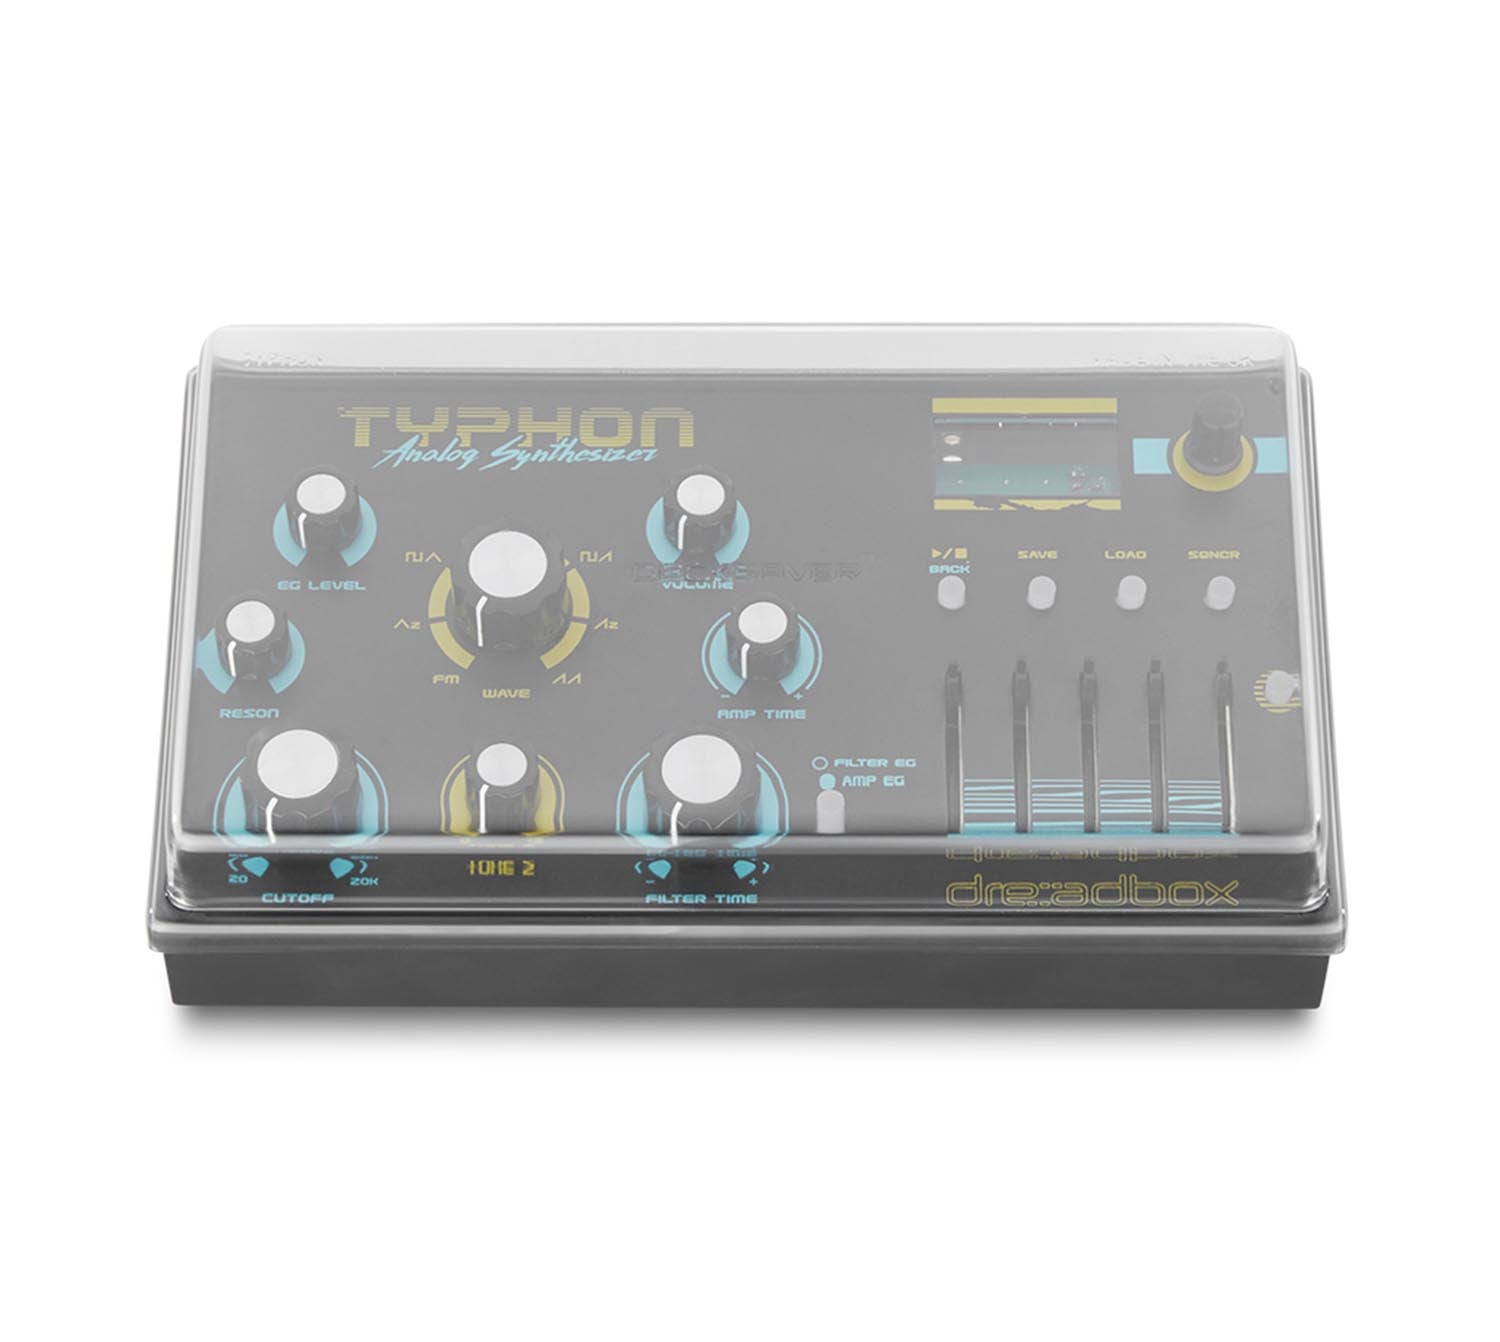 Decksaver DS-PC-TYPHON Protection Cover for Dreadbox Typhon - Hollywood DJ